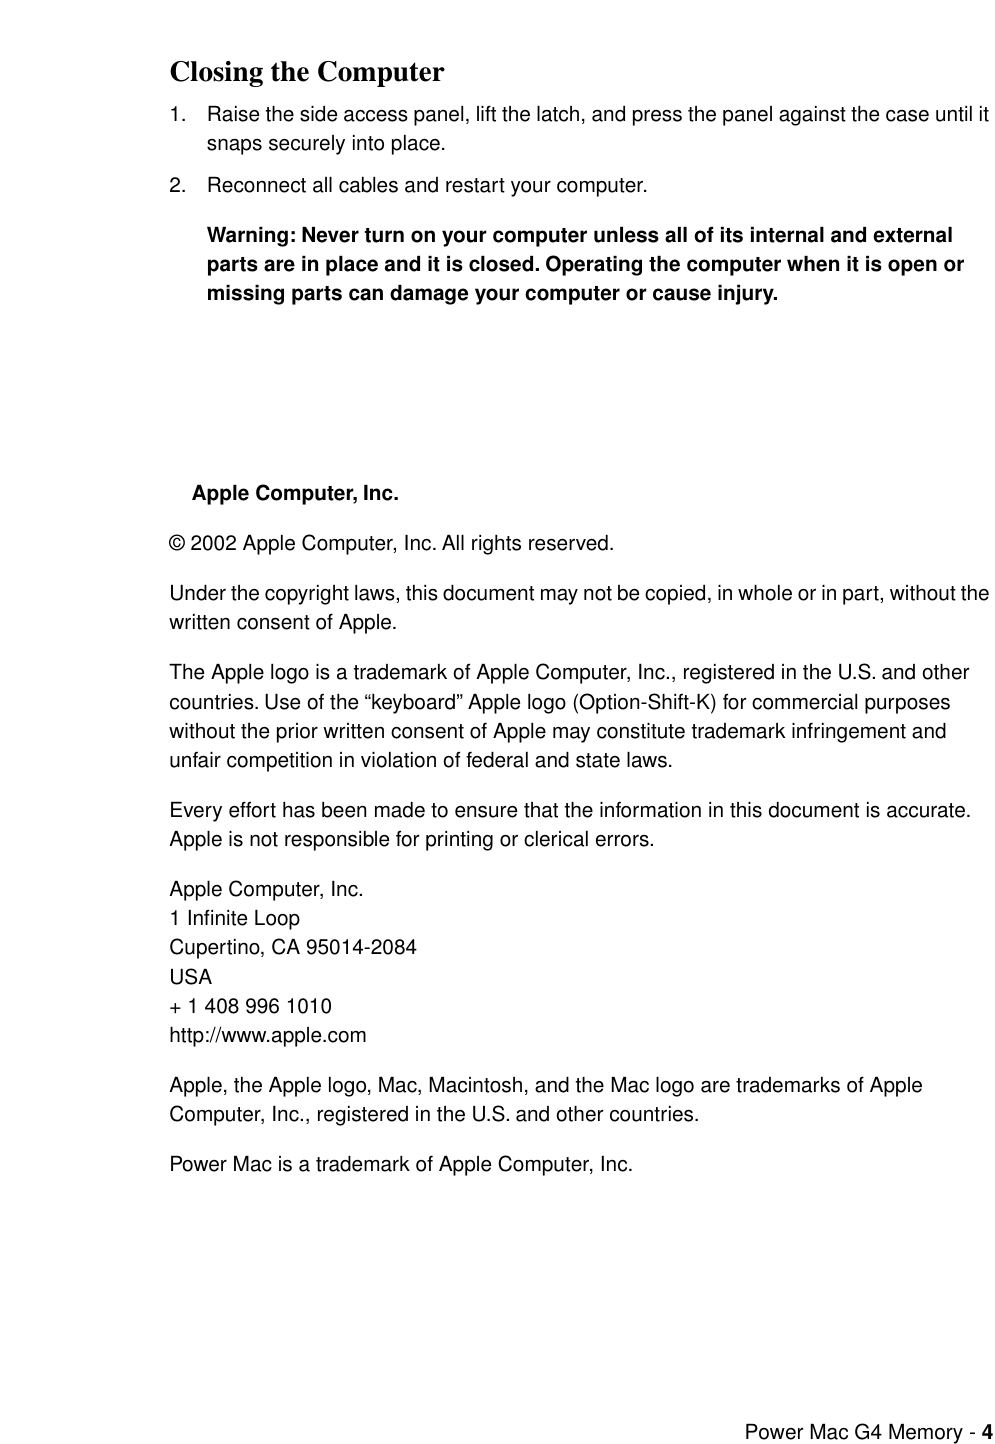 Page 4 of 4 - Apple Power Mac G4 (QuickSilver 2002) User Manual (Mirrored Drive Doors) - Memory (DRAM DIMM) Replacement Instructions G4mdd-mem-inbox